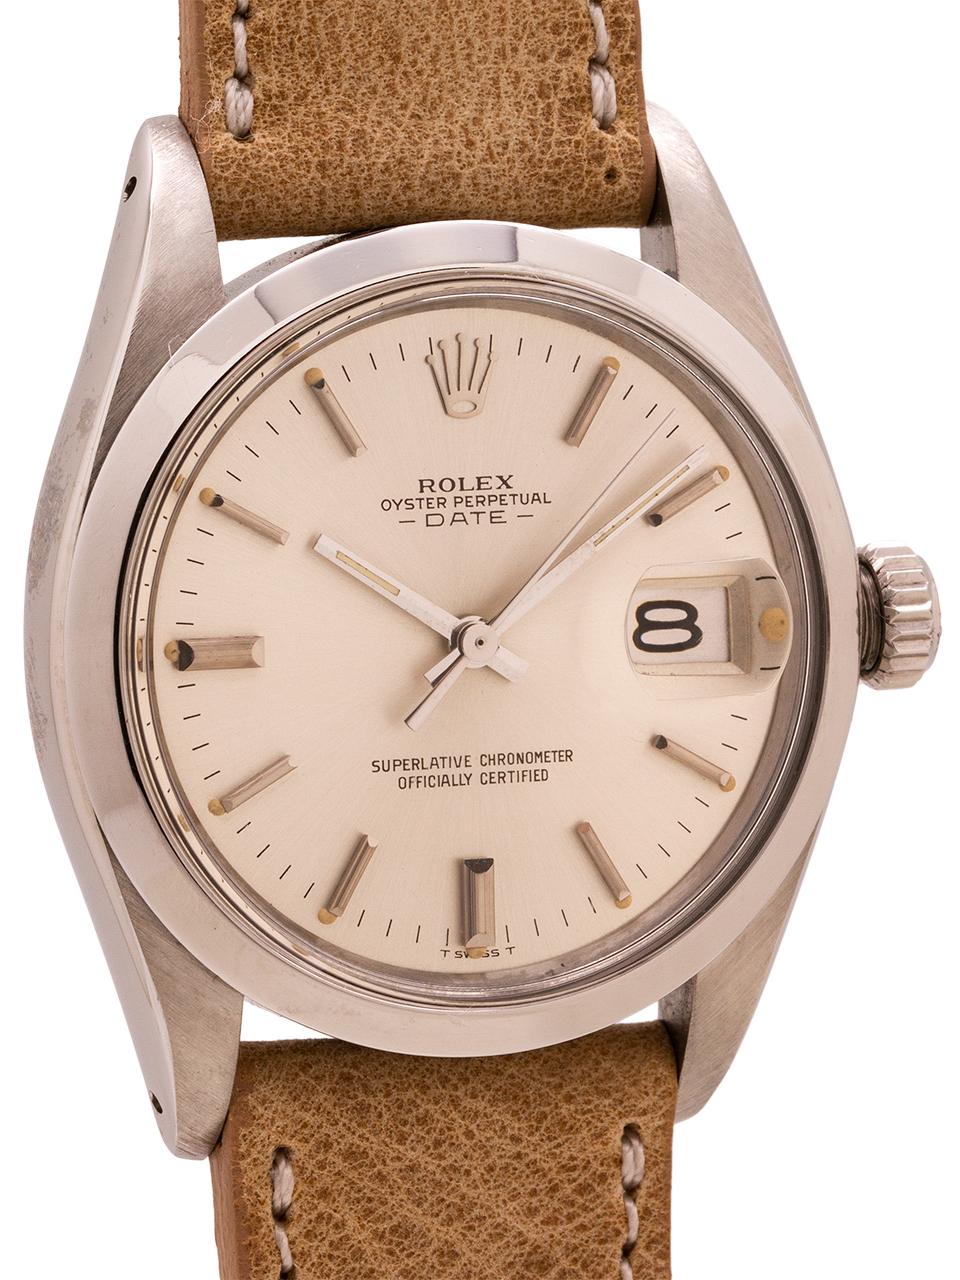 
Rolex Stainless Steel Oyster Perpetual Date ref# 1500 serial #3.1 million circa 1970. Featuring a 34mm diameter Oyster case with smooth bezel and acrylic crystal and mint condition silver dial with fine applied hour indexes and silver stick hands.